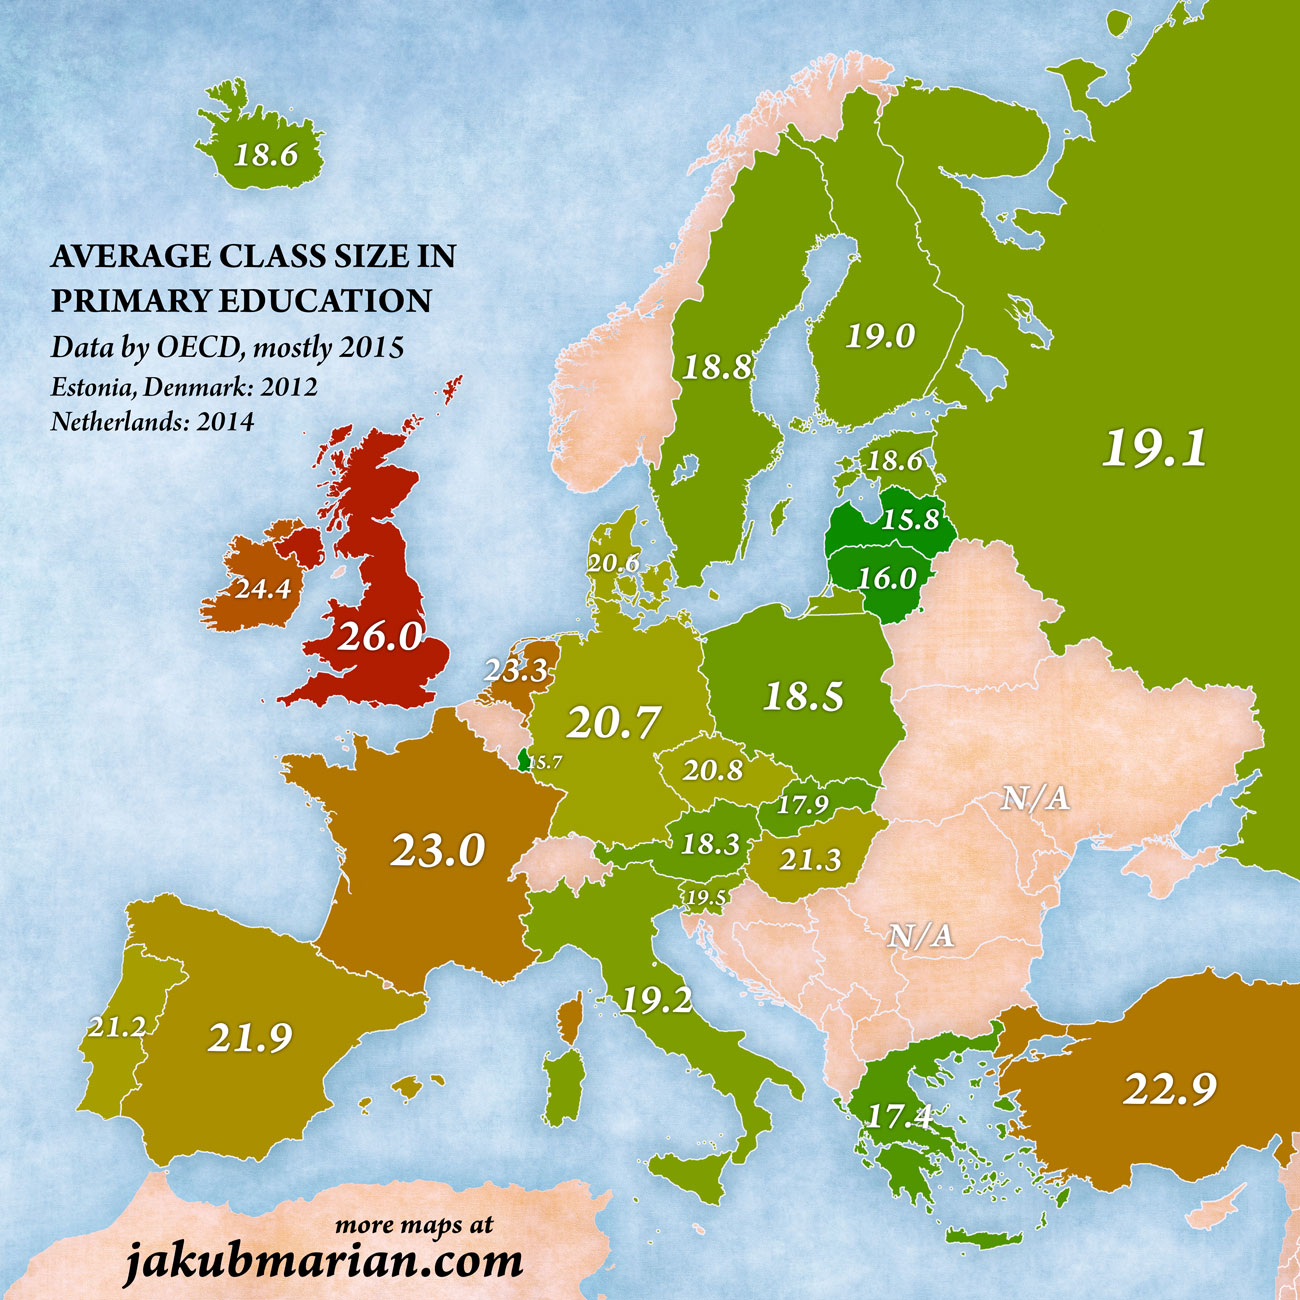 Average class size in primary education